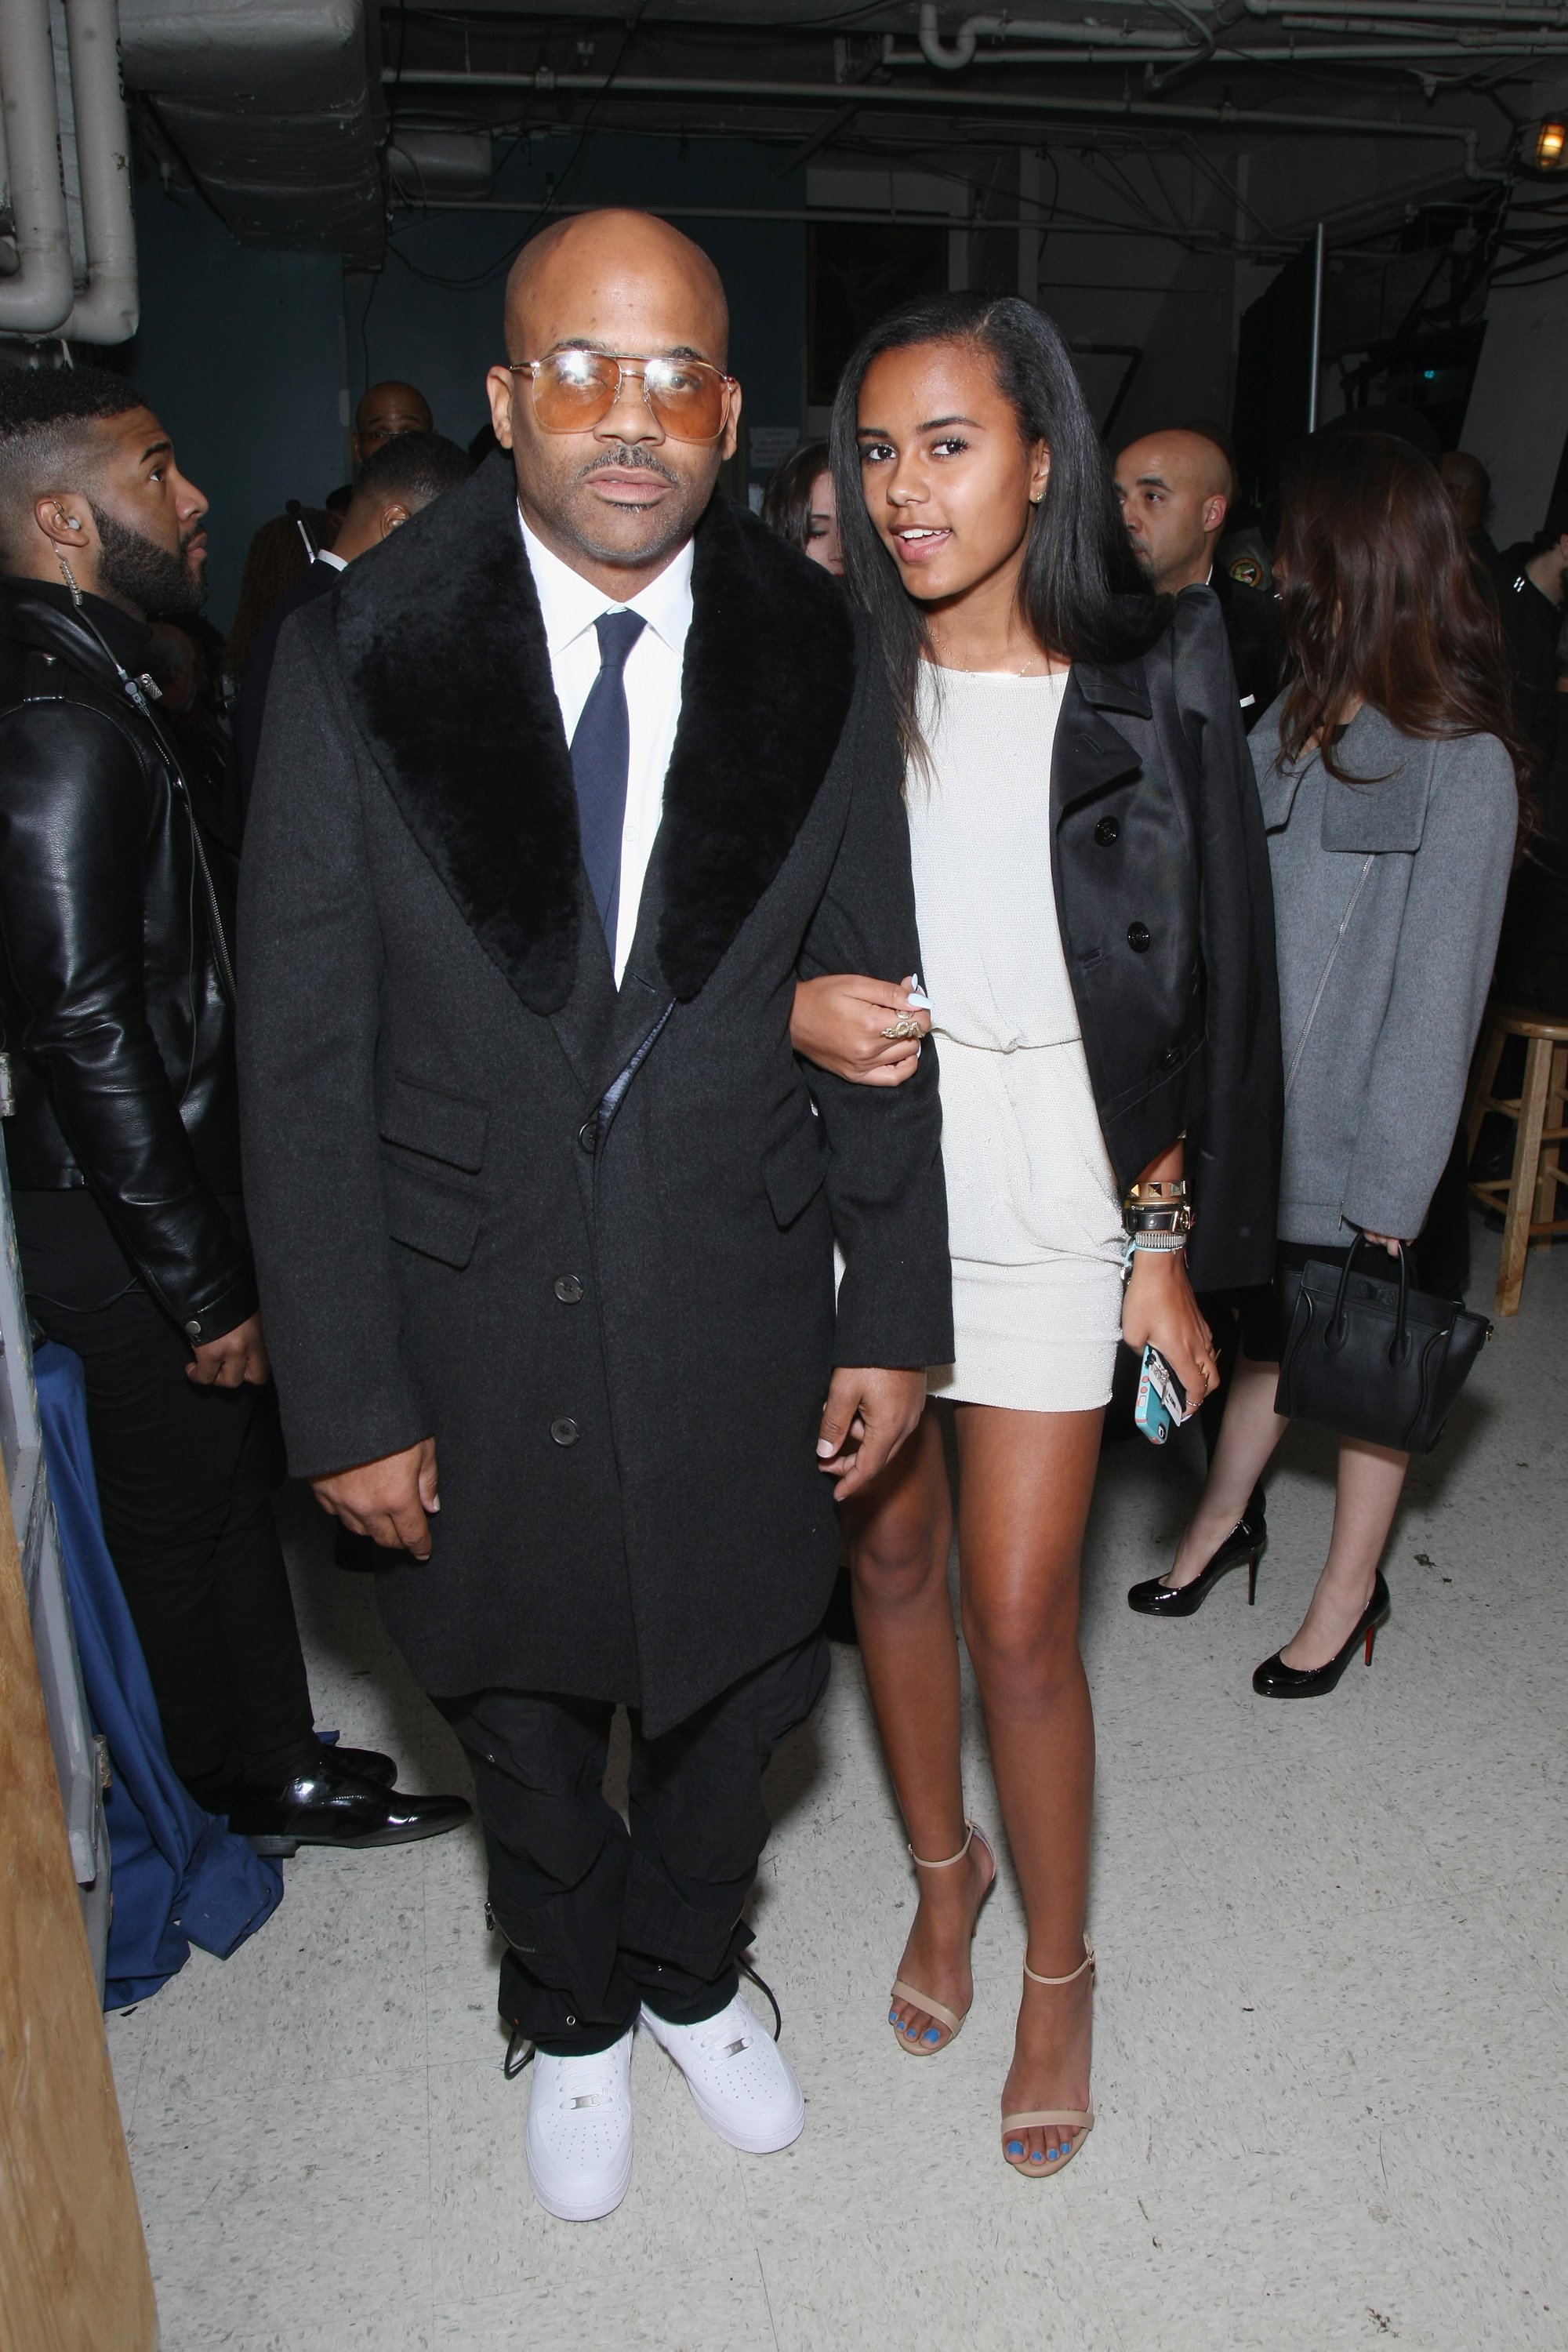 Damon Dash with his daughter, Ava Dash at "The BET Honors" in 2015. | Photo: Getty Images